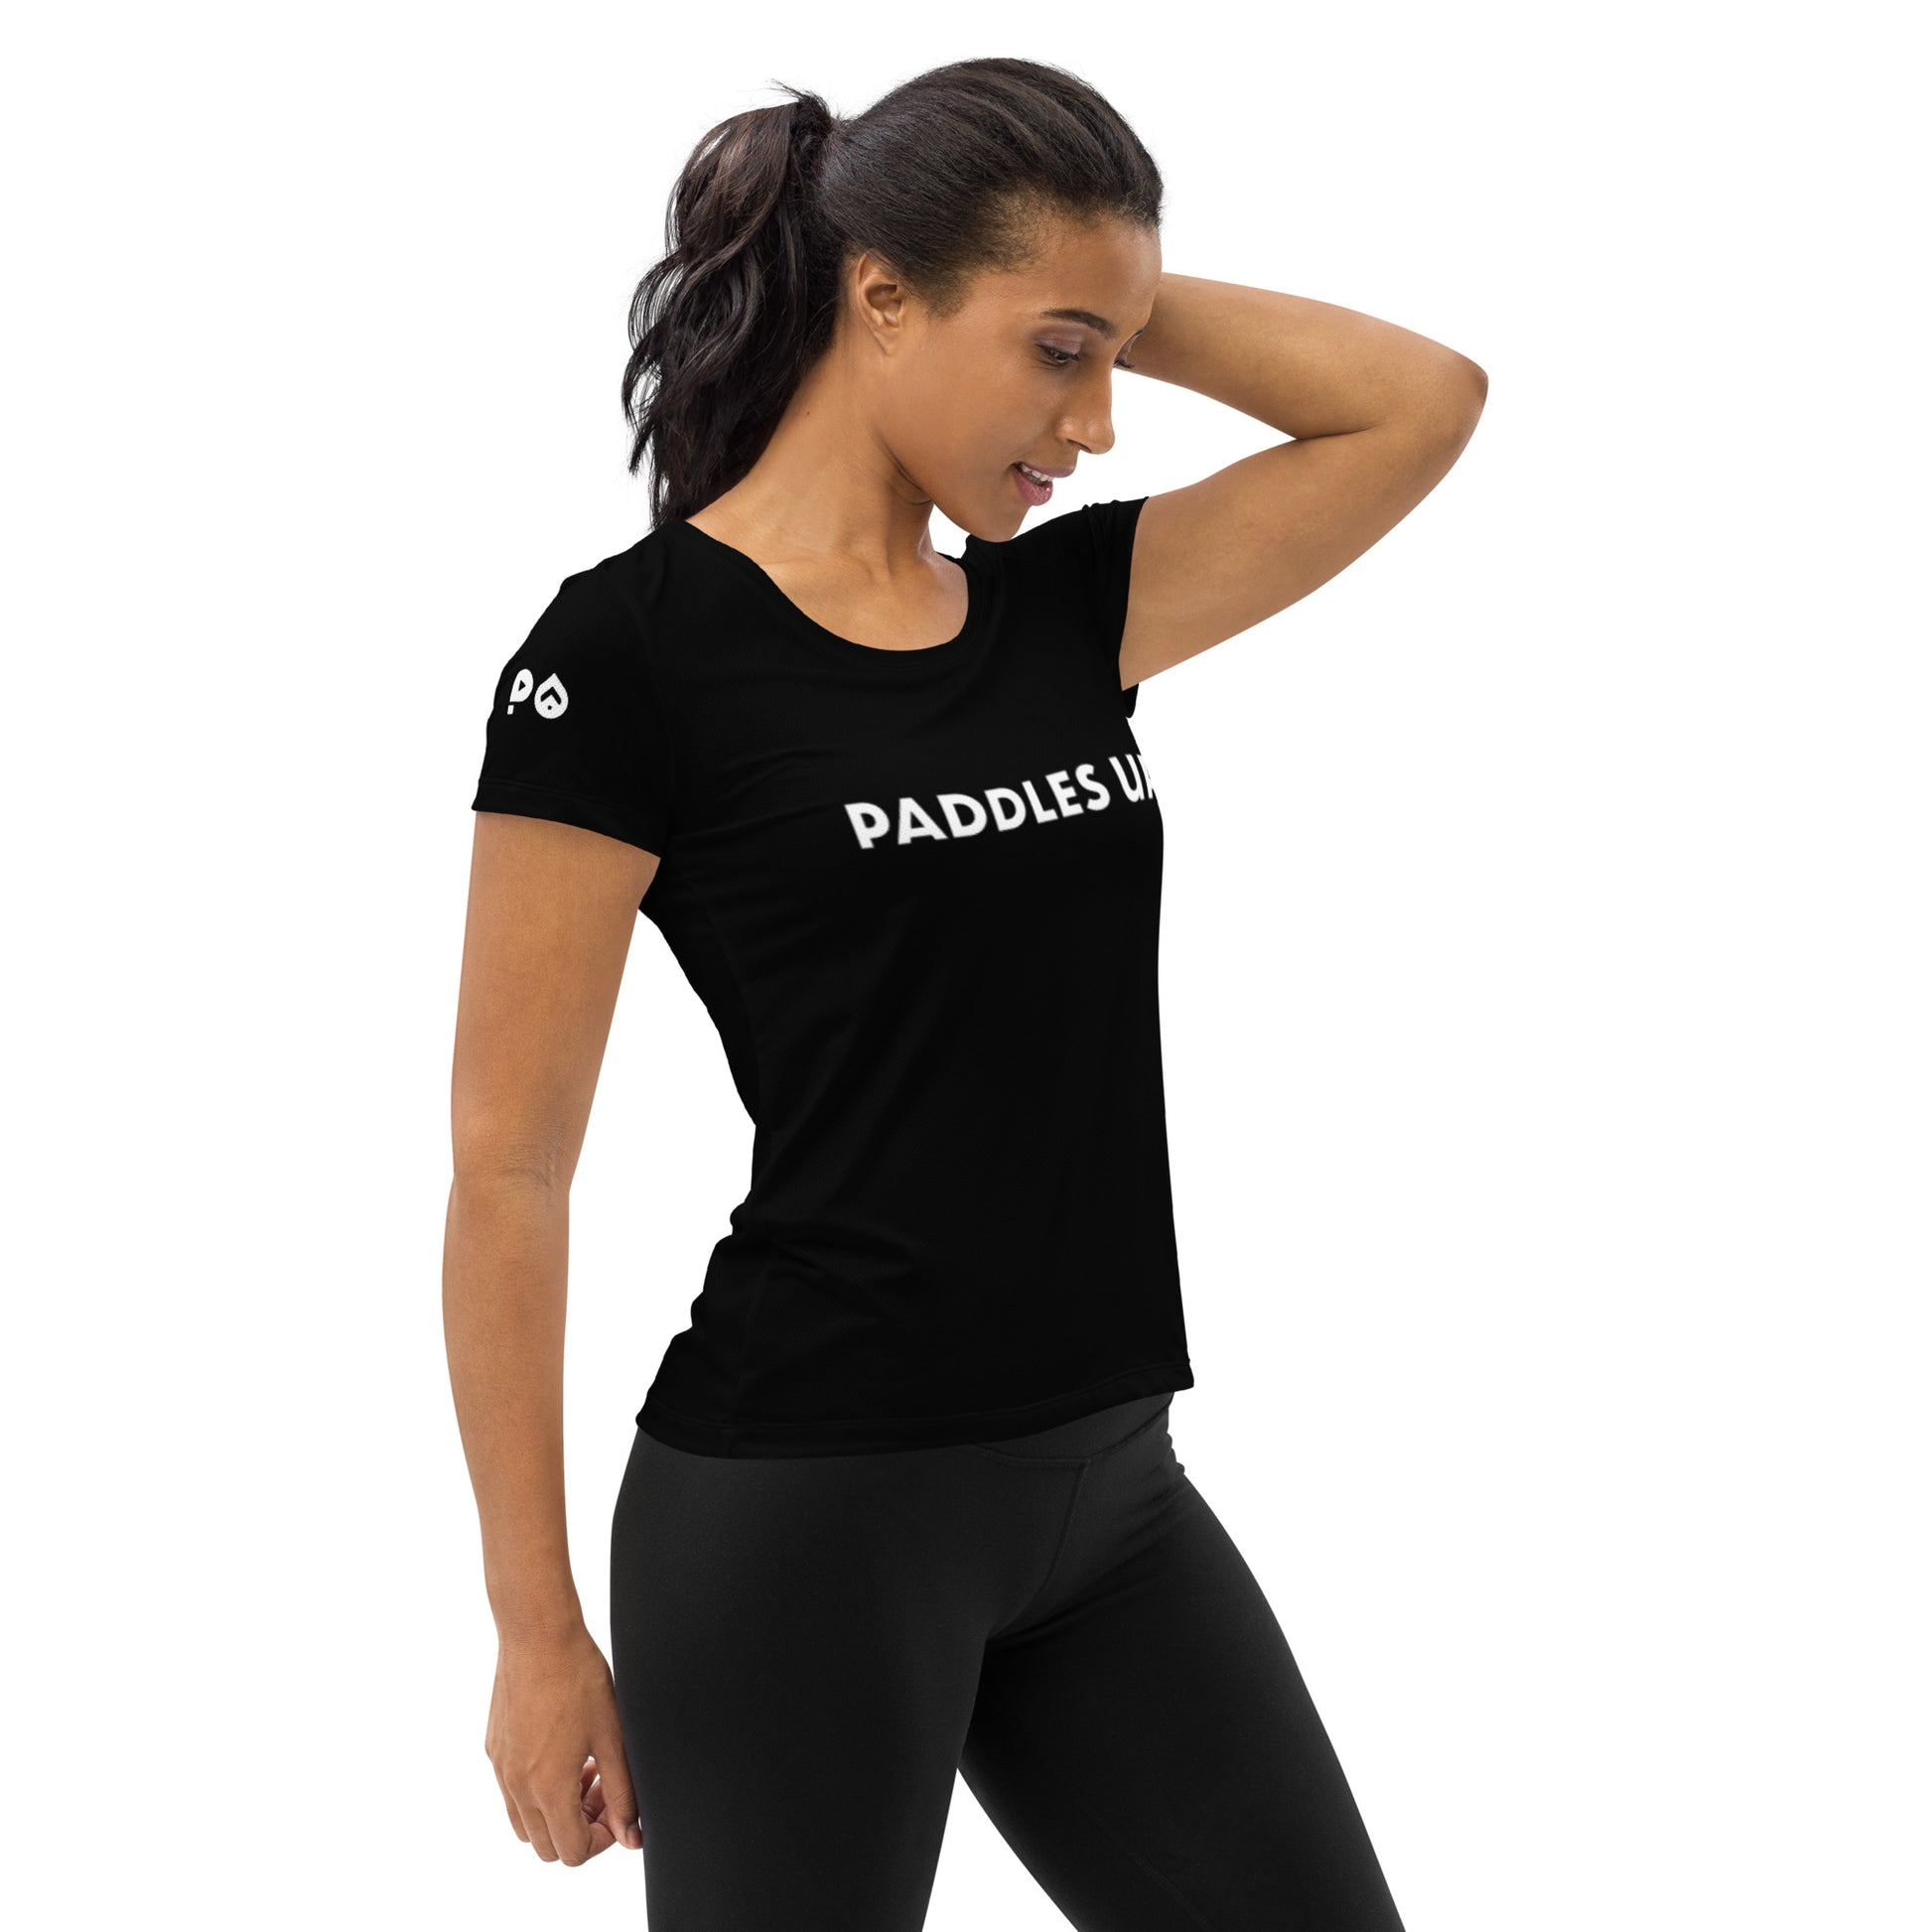 Workout Shirts For Women Womens T Shirts Womens Athletic Tops